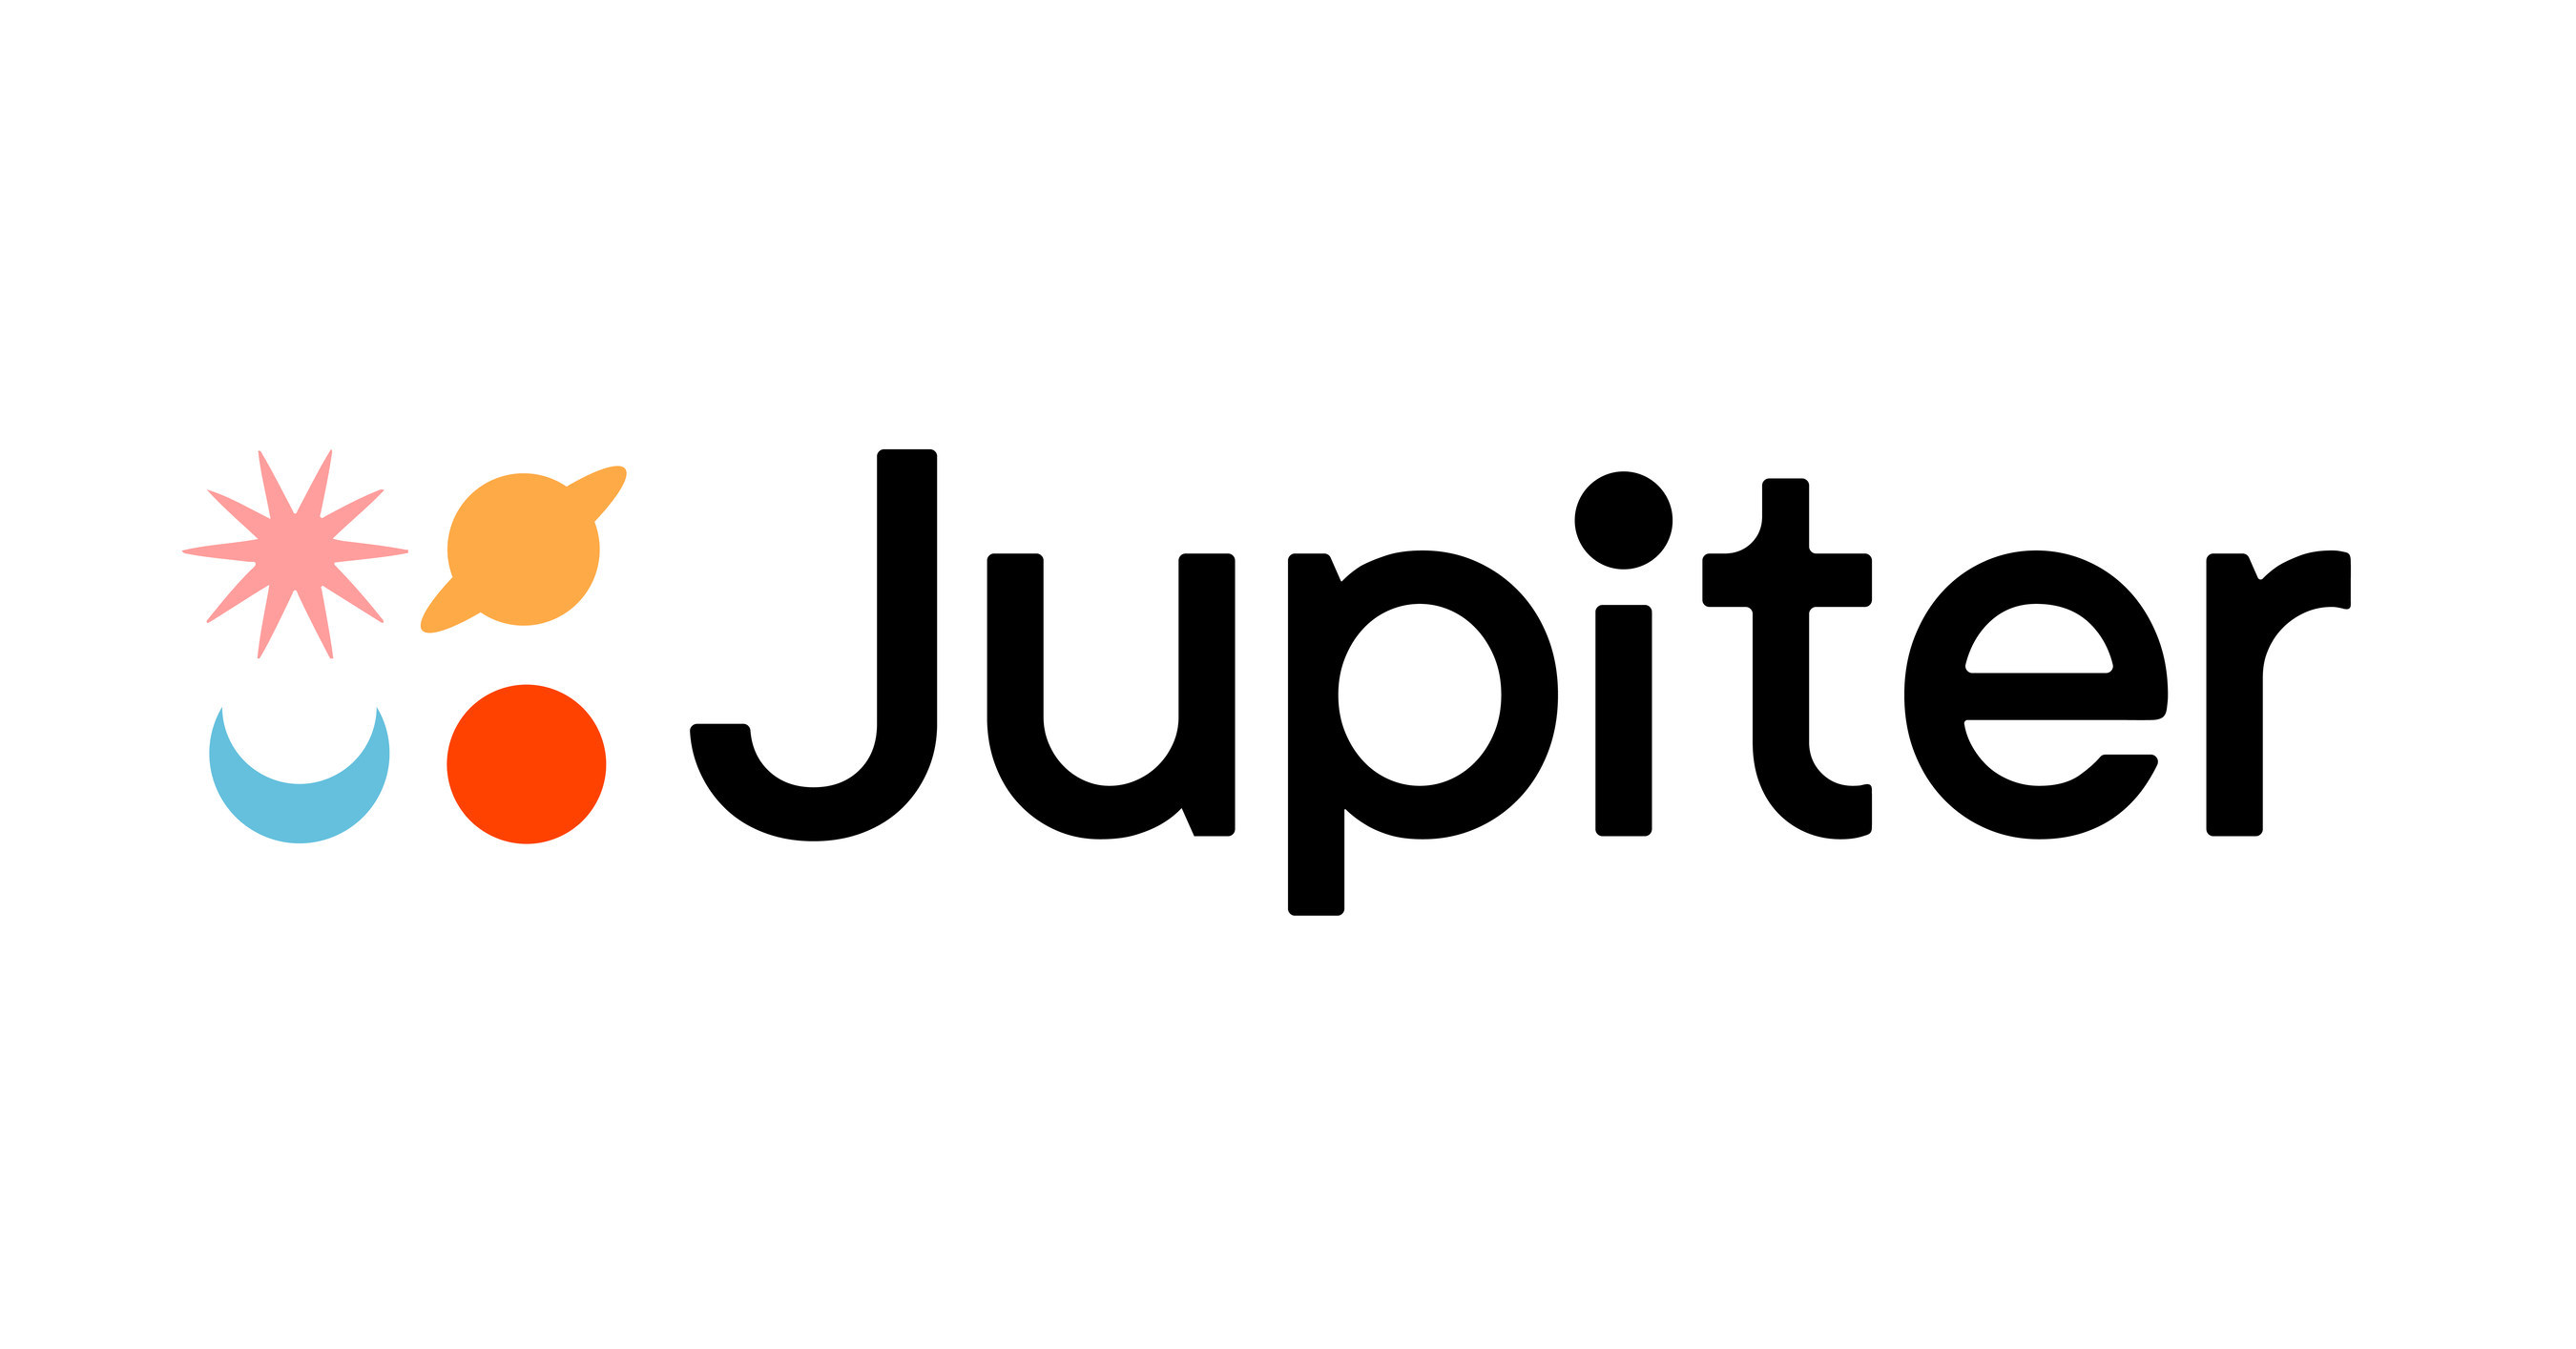 Launching Jupiter, the creator-first recipe and grocery shopping platform